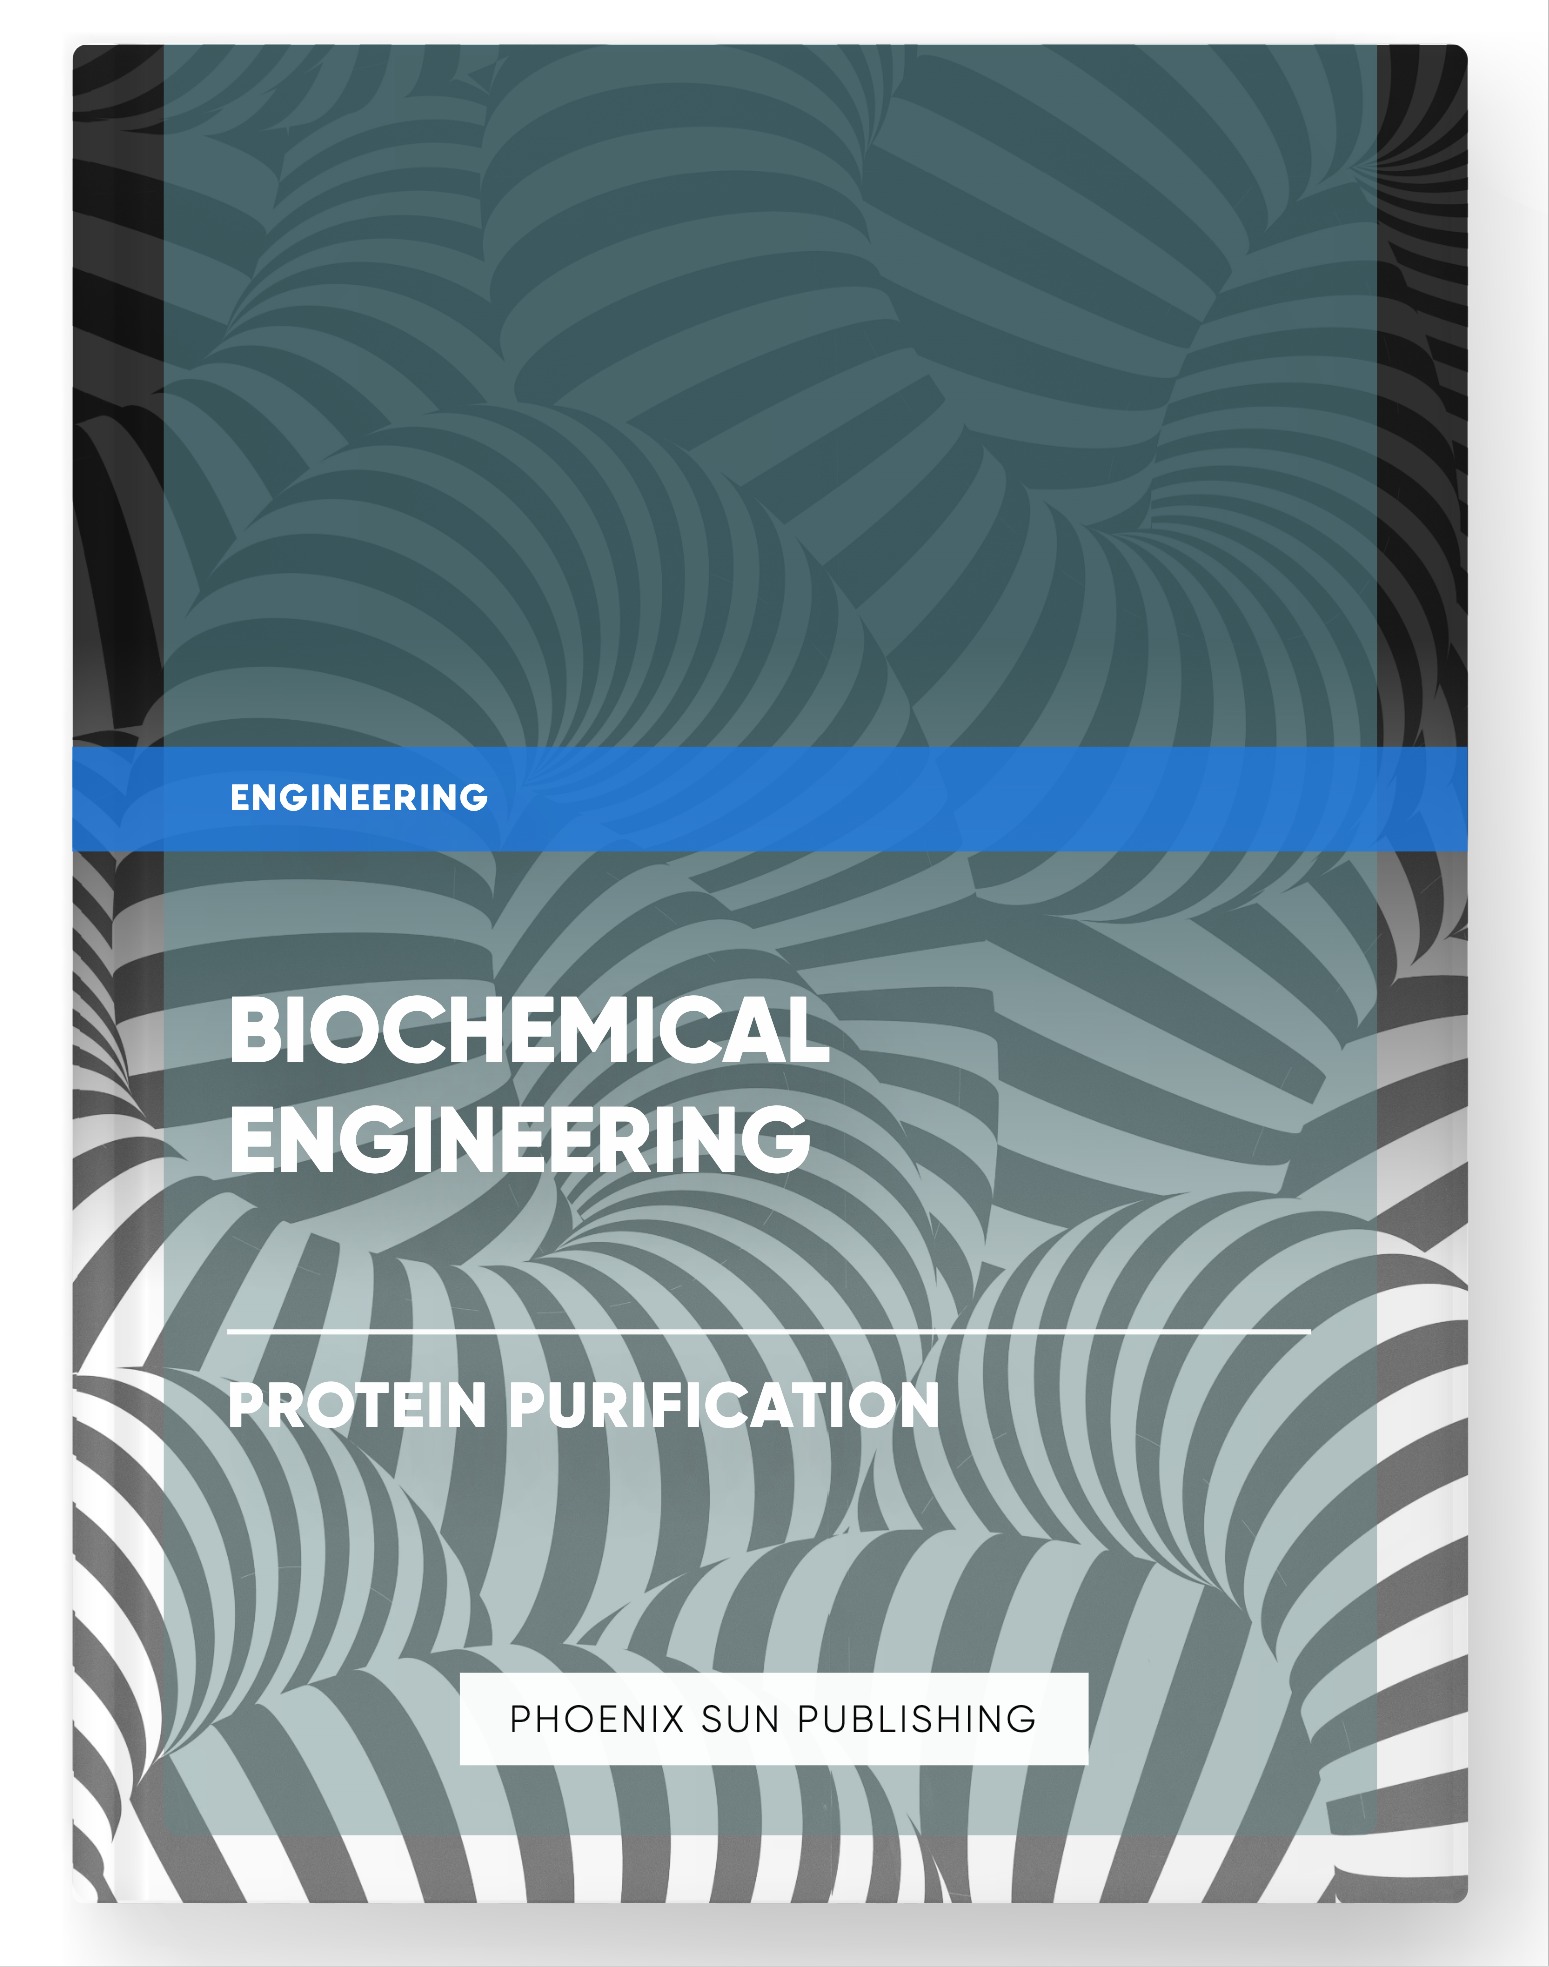 Biochemical Engineering – Protein Purification